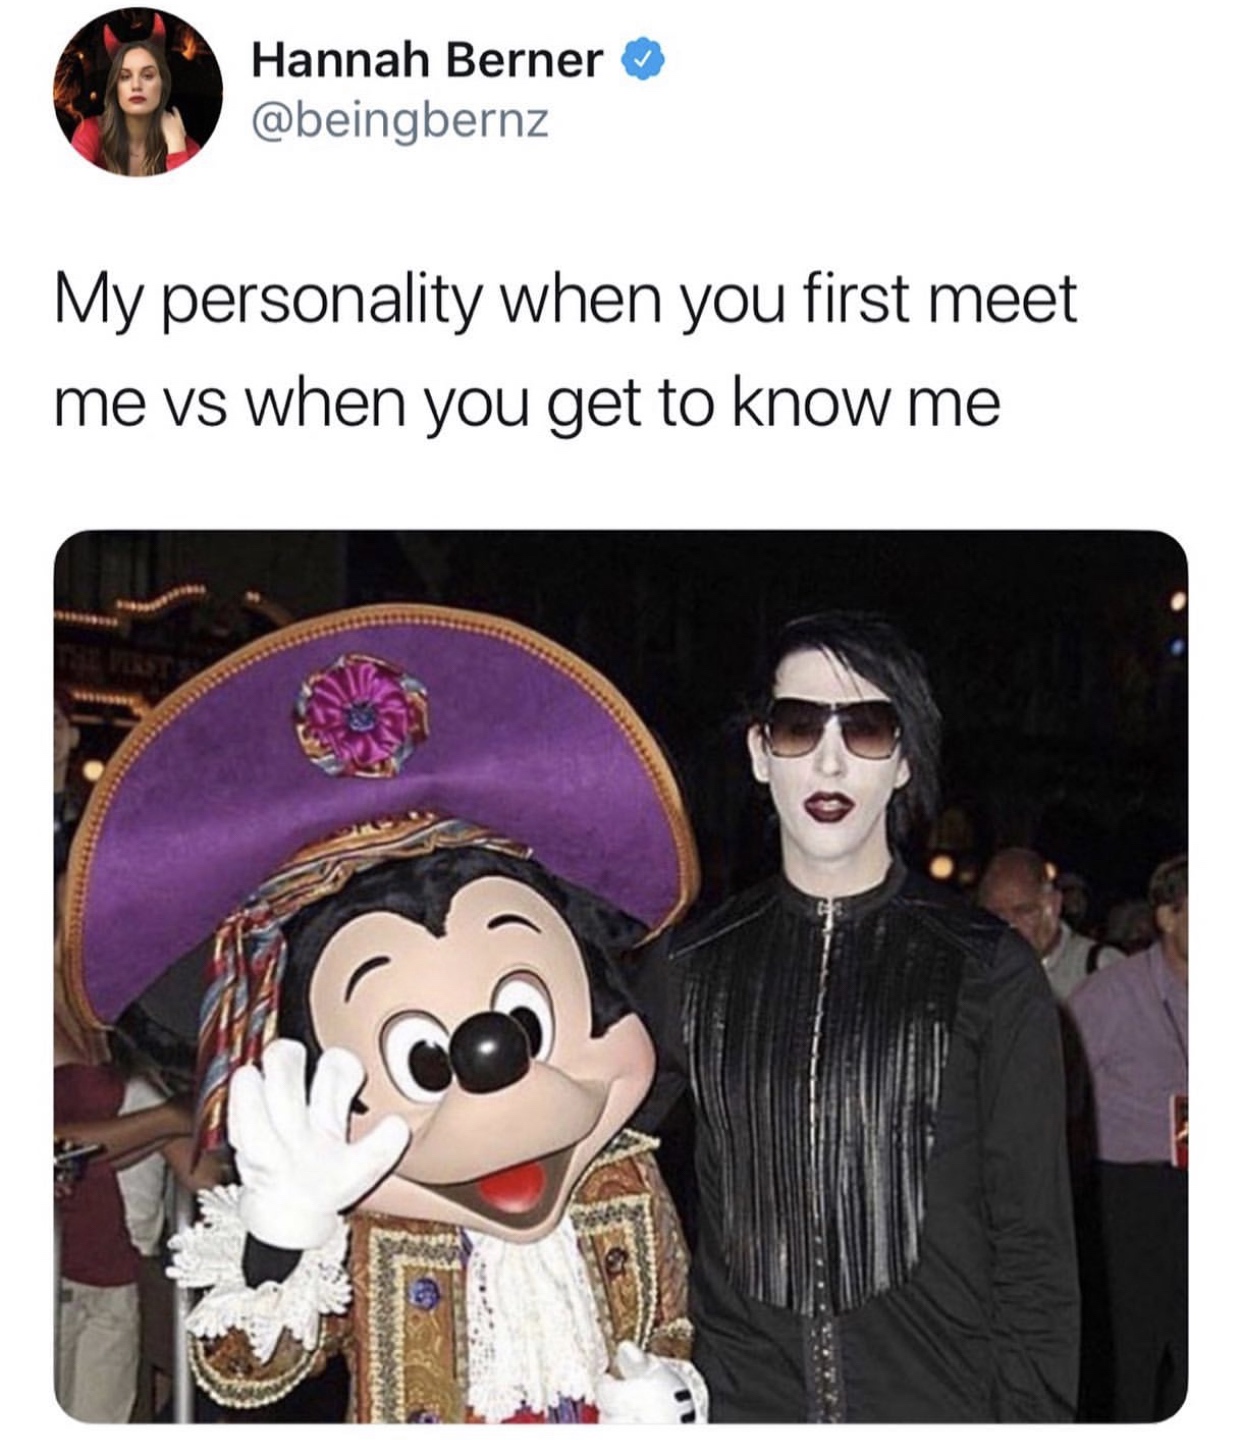 marilyn manson mickey mouse - Hannah Berner My personality when you first meet me vs when you get to know me